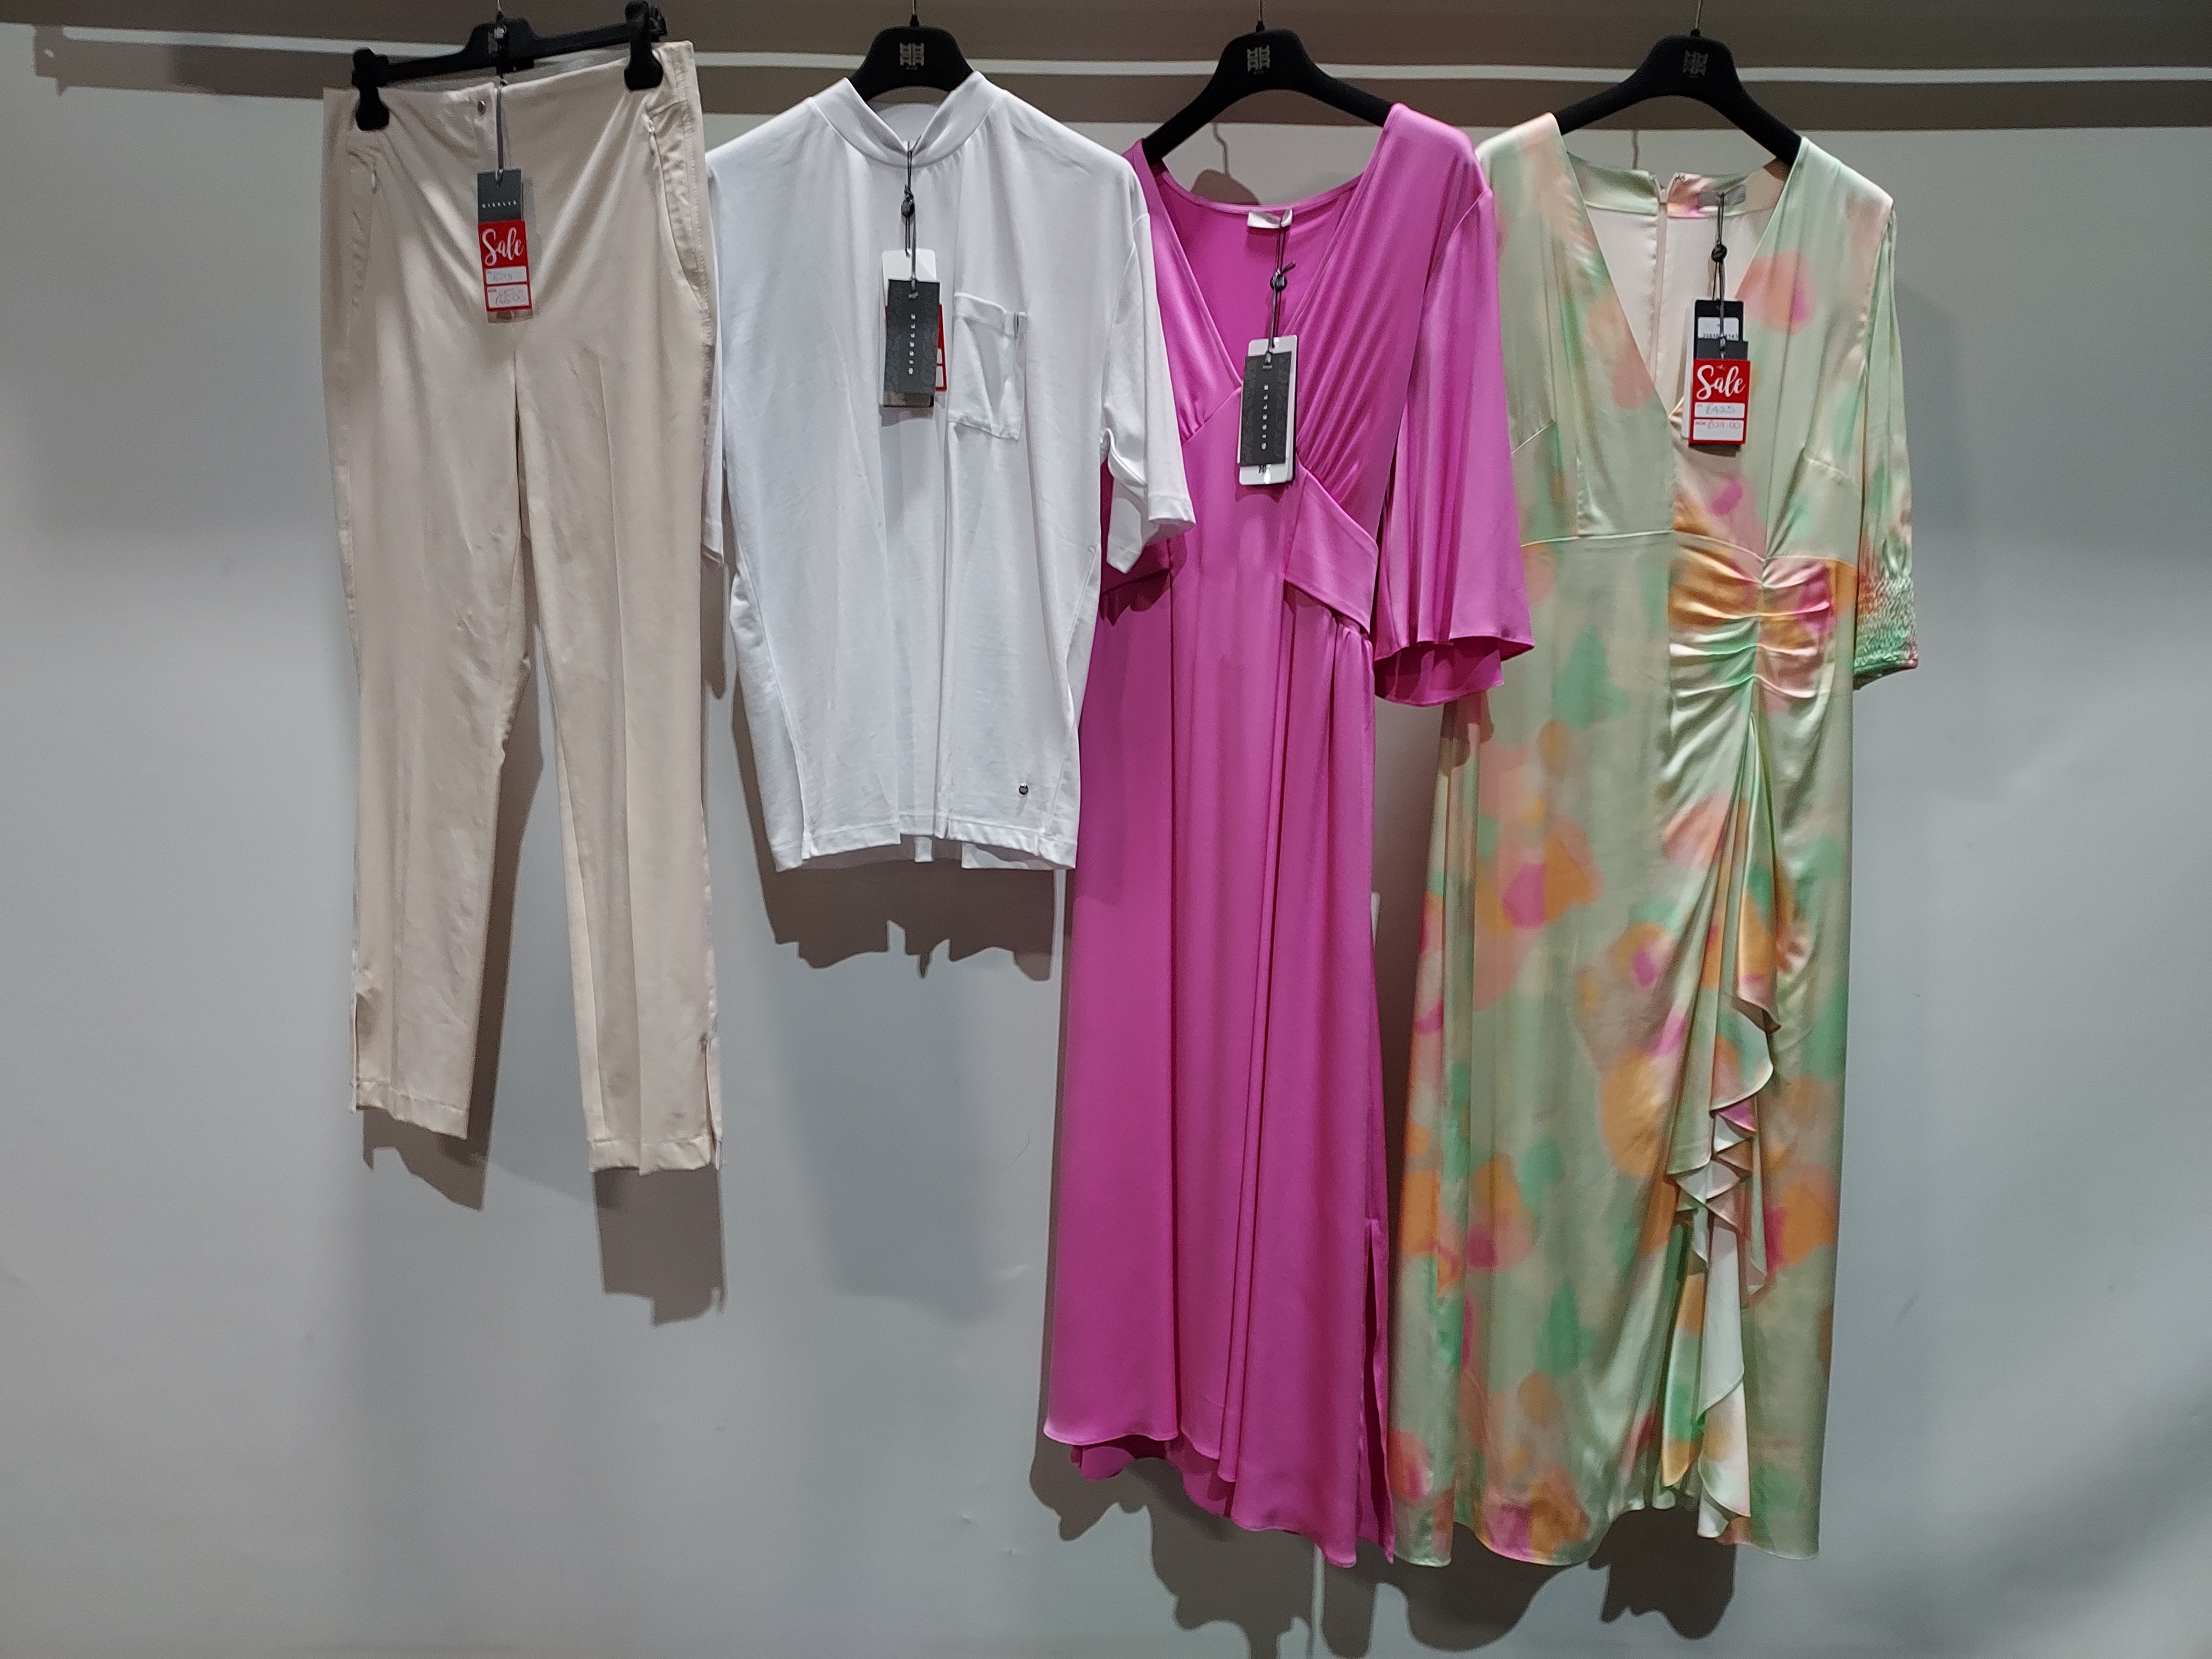 10 PIECE MIXED BRAND NEW RIANI CLOTHING LOT CONTAINING PANTS, BLOUSE, T-SHIRTS, DRESS, KNITTED